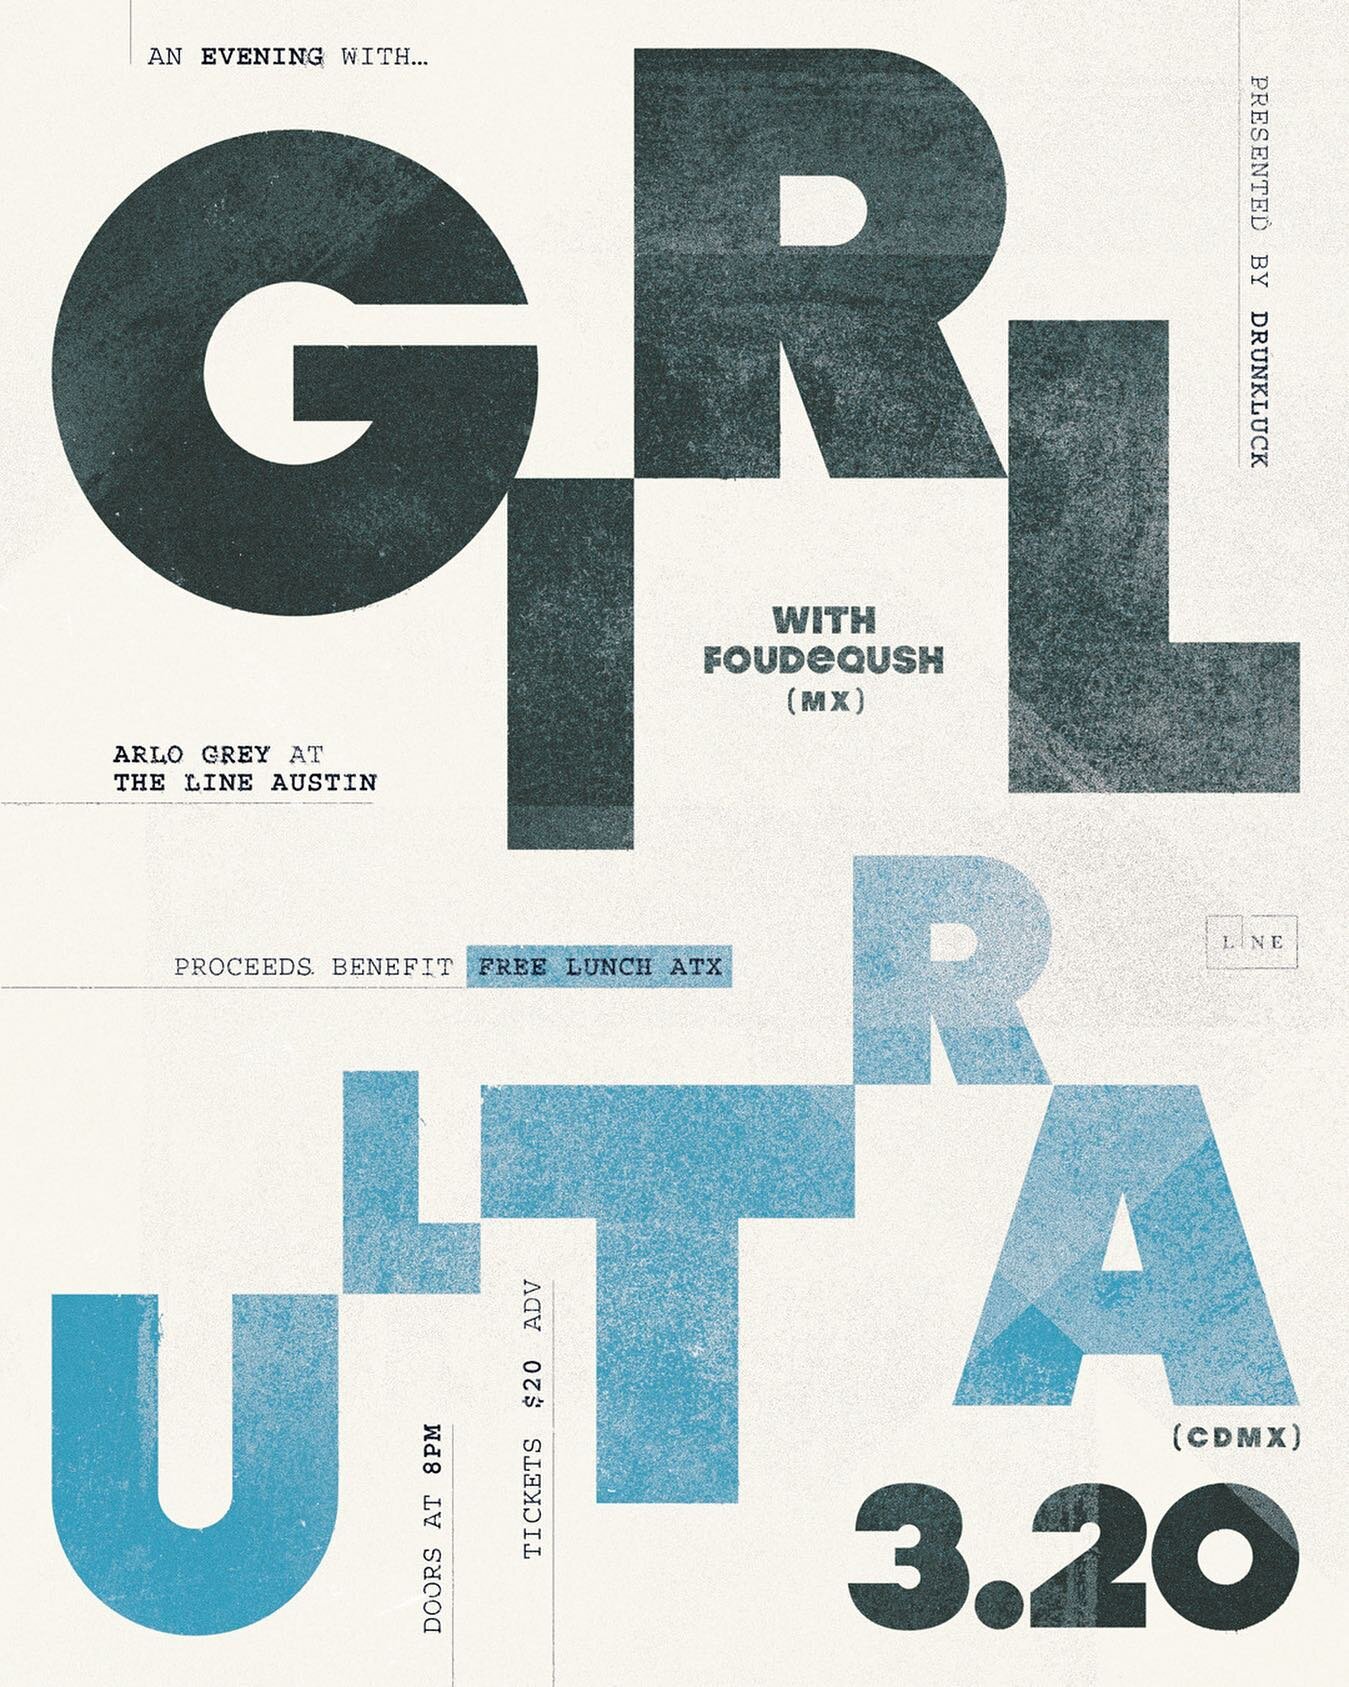 Whether you saw 1000 shows last week 🥵 - or avoided SXSW entirely 🙃- we promise, tomorrow&rsquo;s show will be the one you were looking for! Join us in the intimate and stunning @arlogreyaustin for a live set from the one-and-unica @girlultra with 